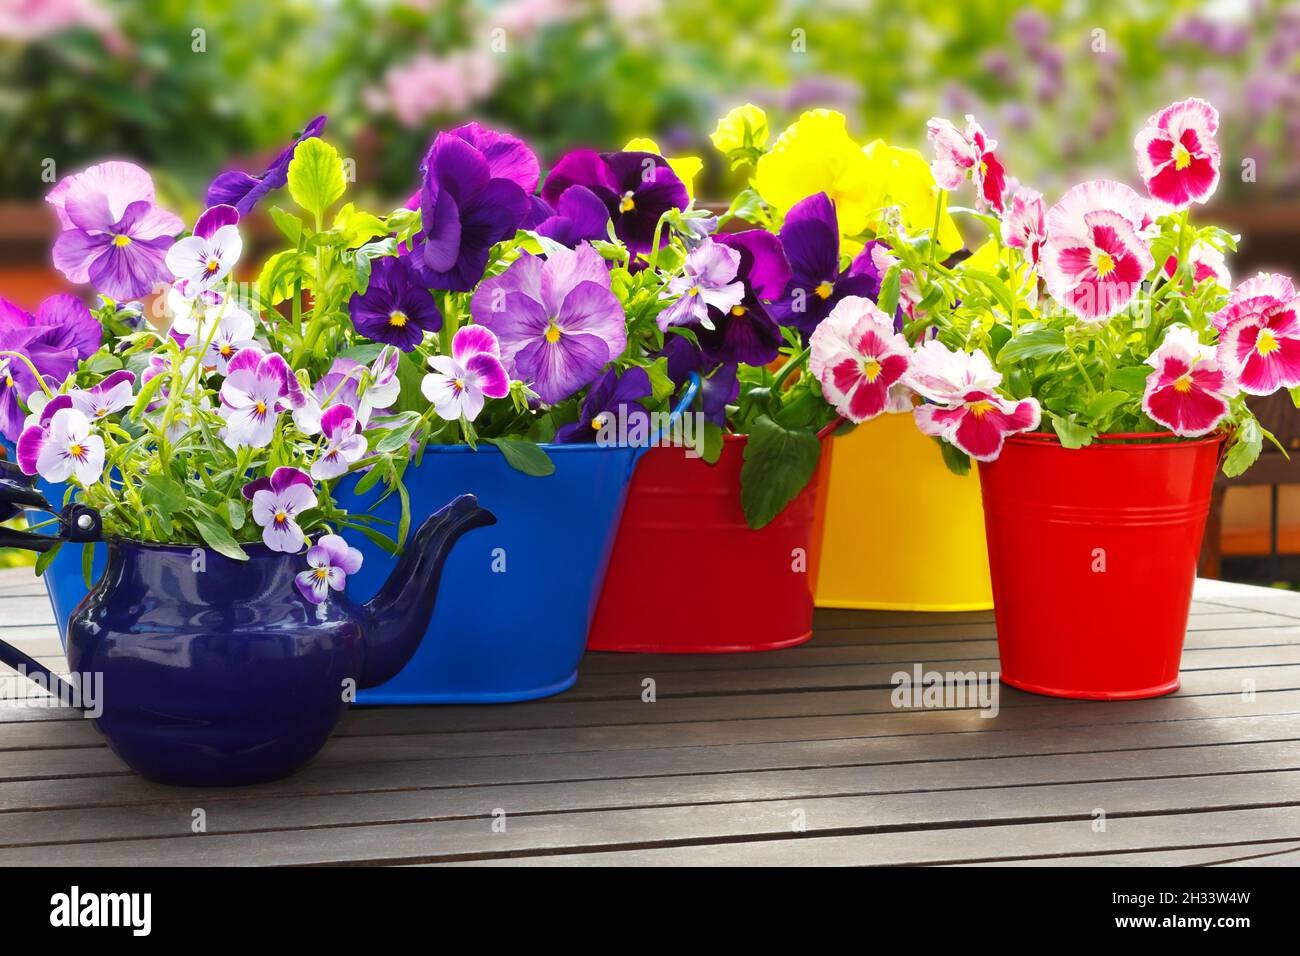 Purple, violet, red and yellow pansy flowers in 4 pots and an enameled jug on a wooden balcony table in spring, background template Stock Photo